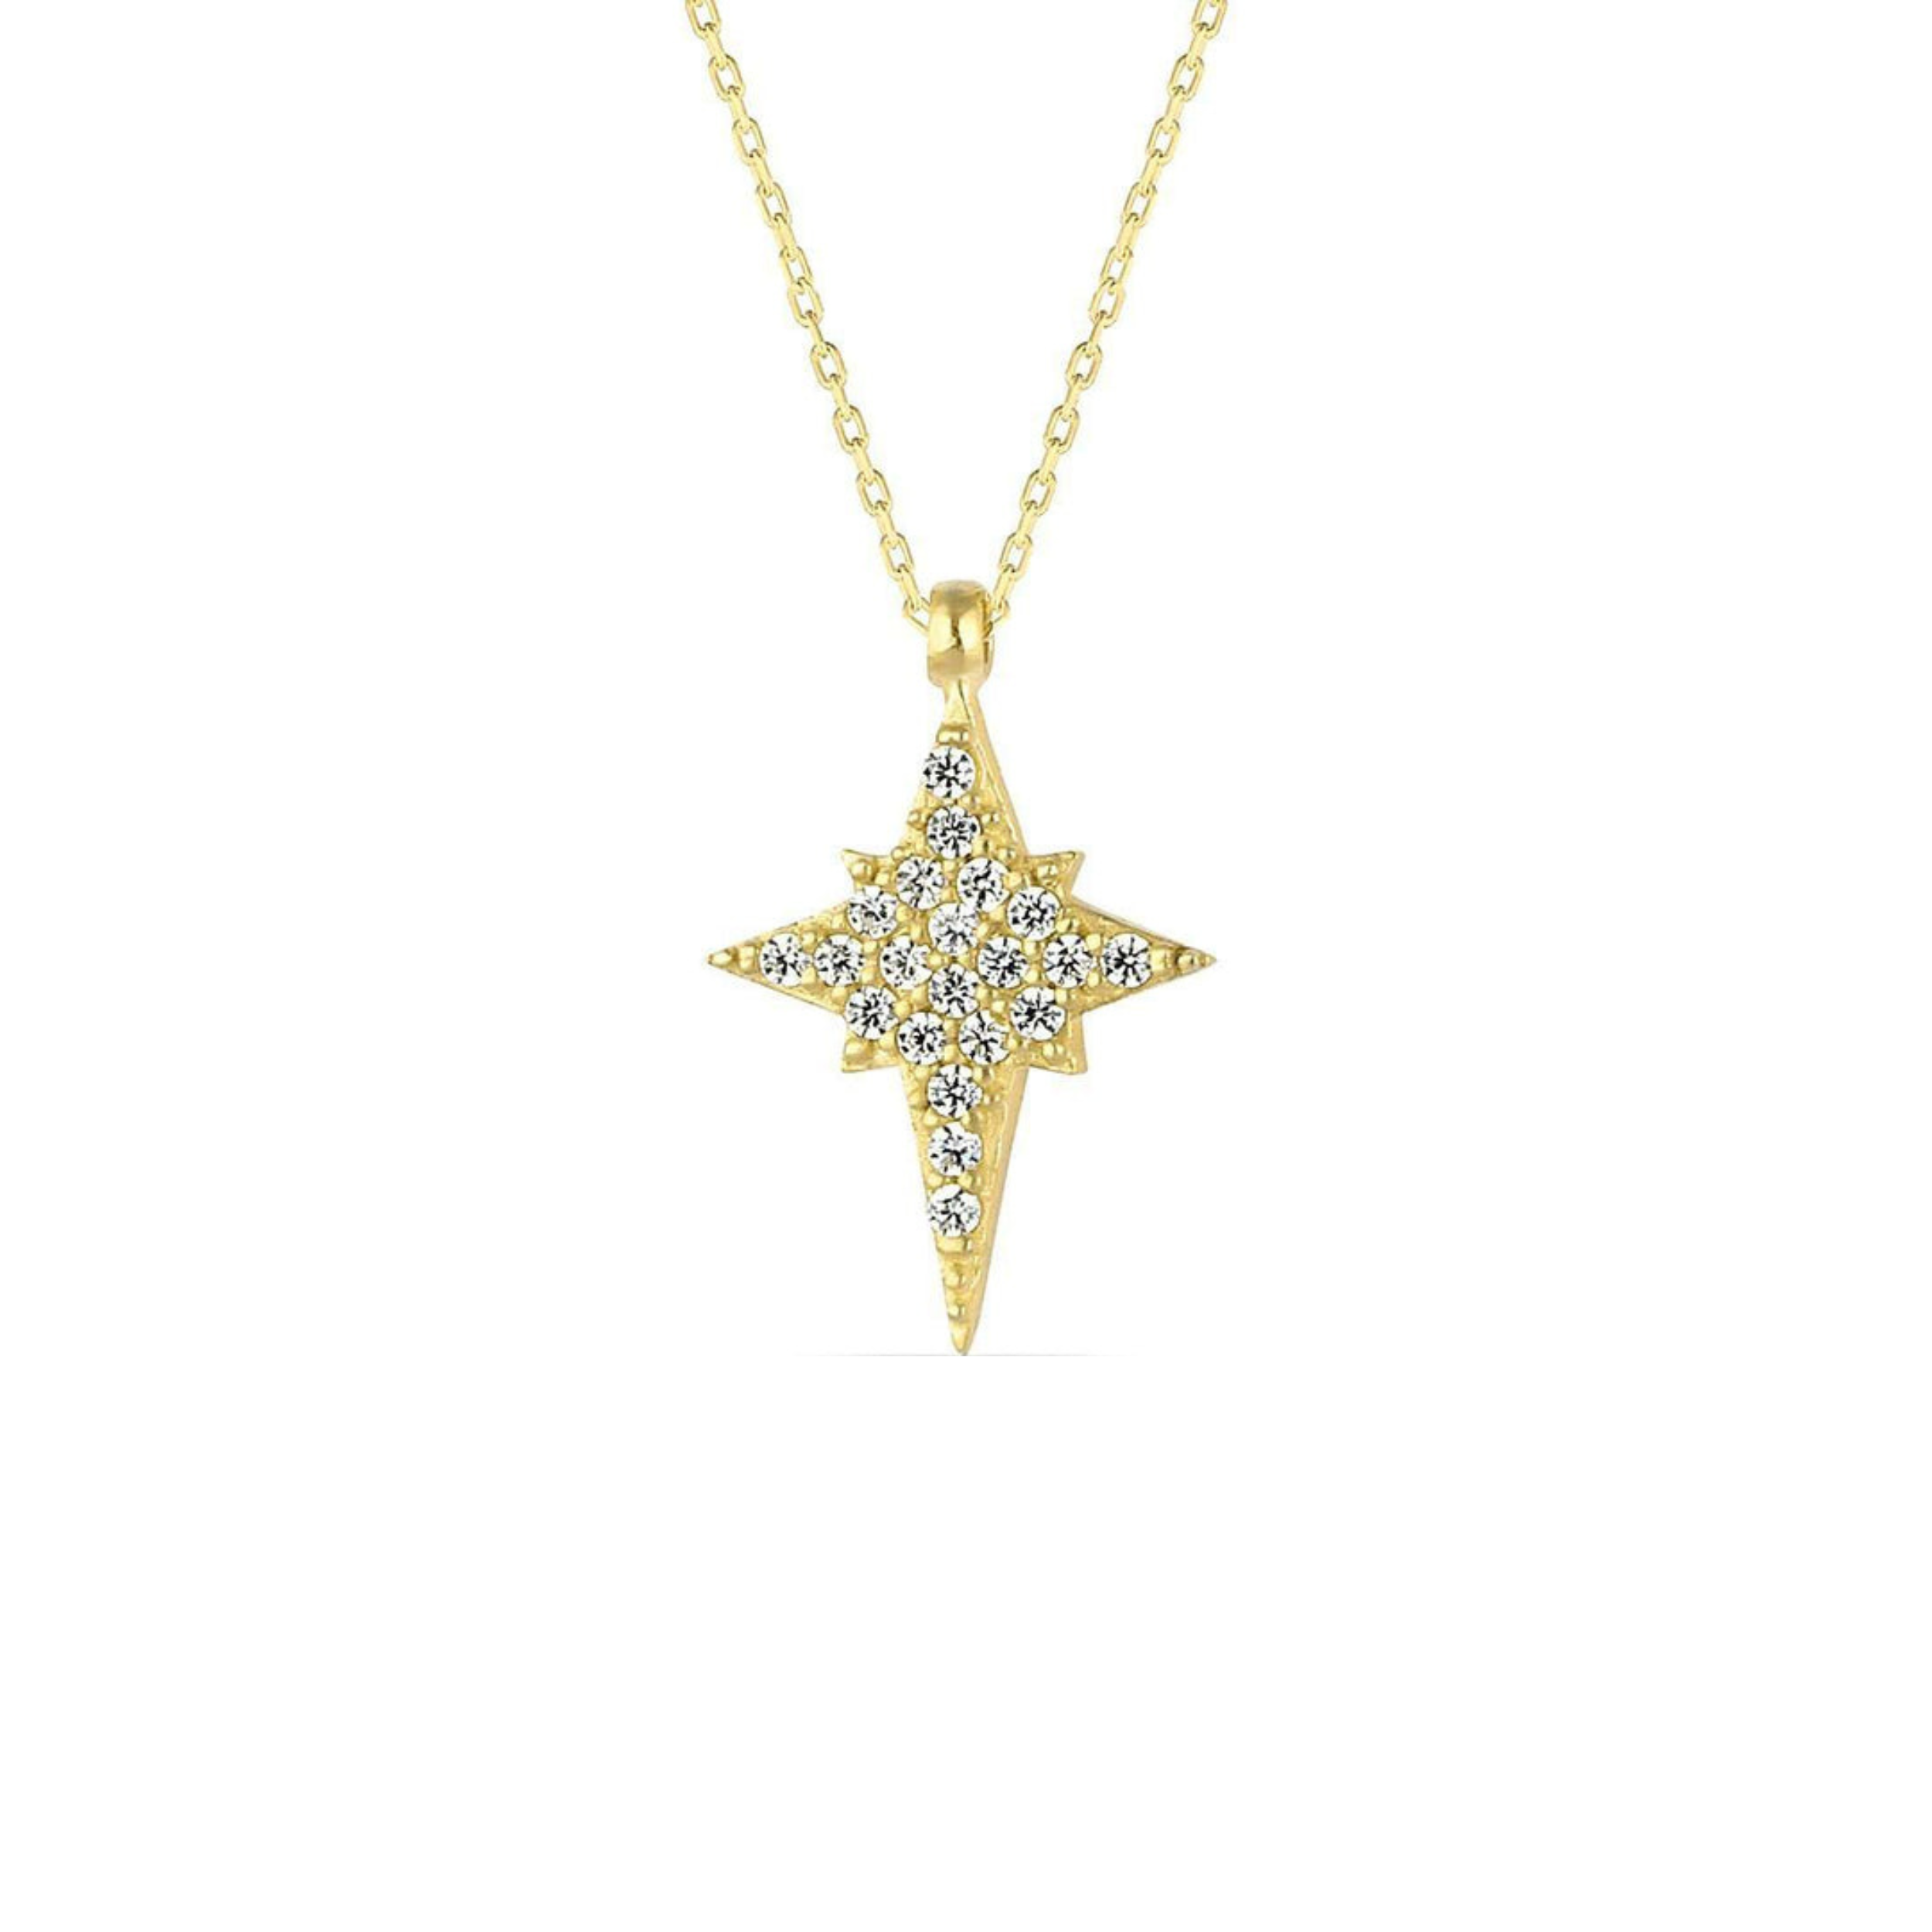 Northern Star Polaris Sterling Silver Necklace